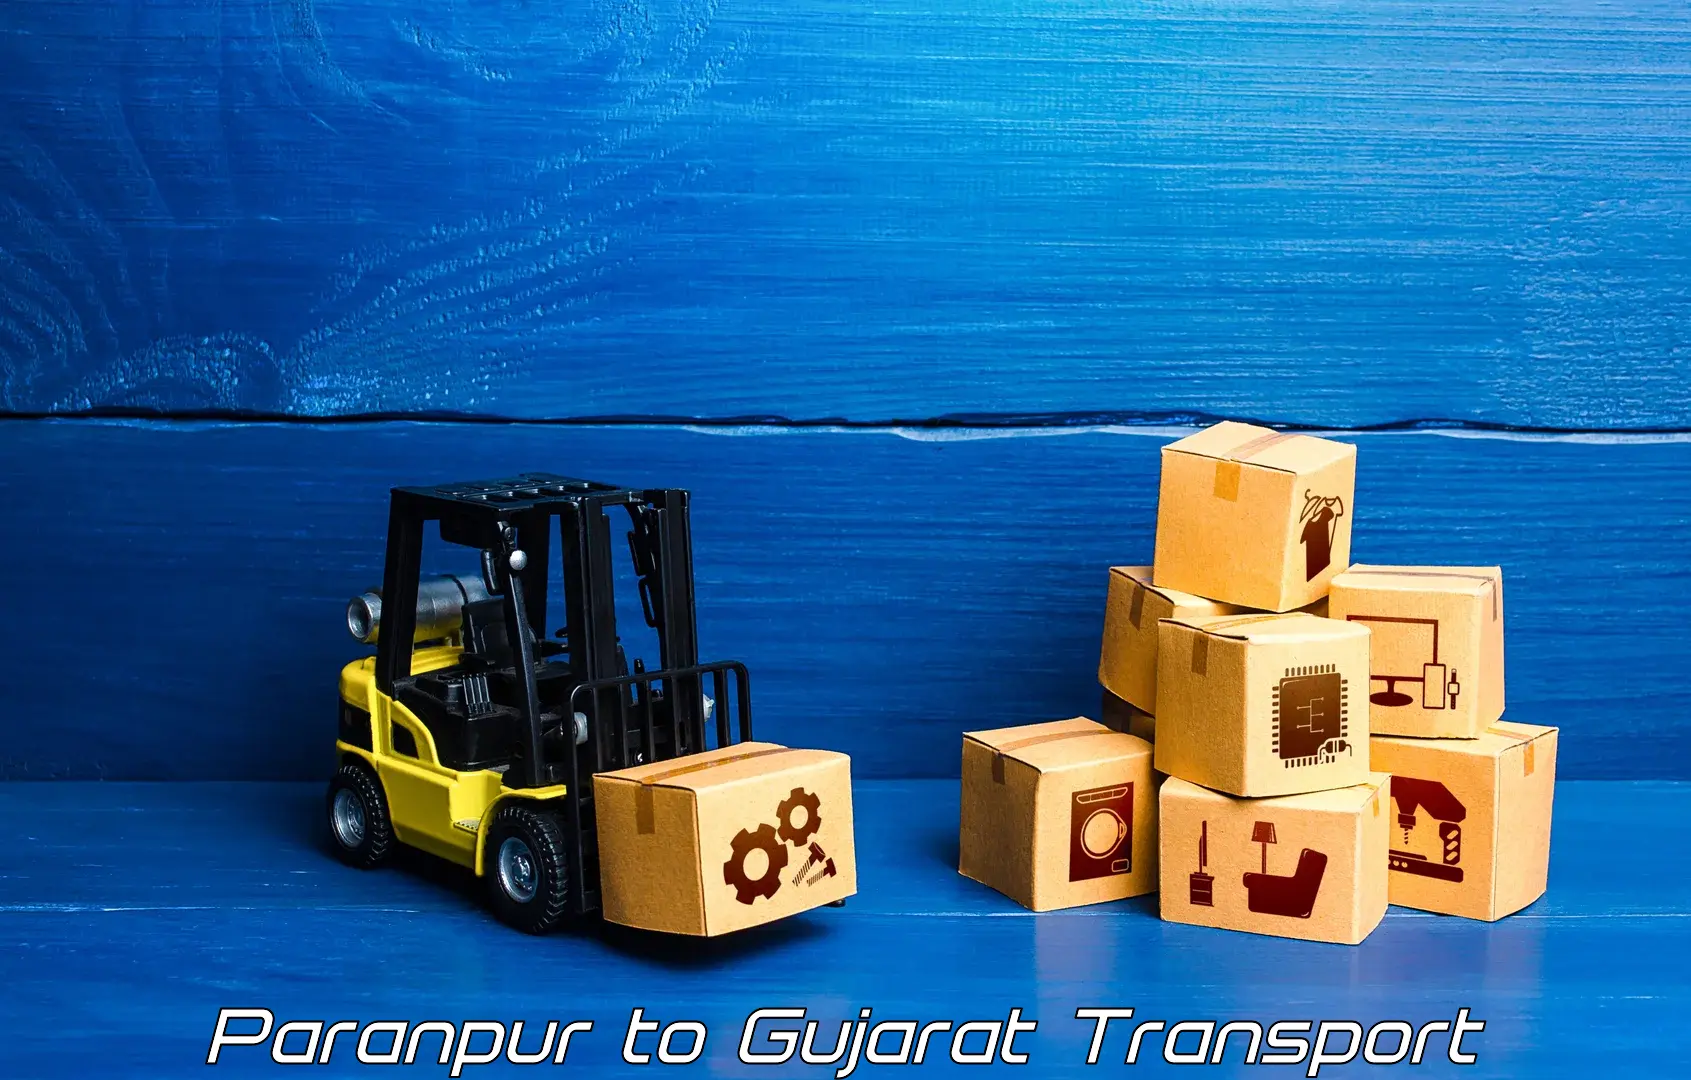 Parcel transport services Paranpur to Mundra